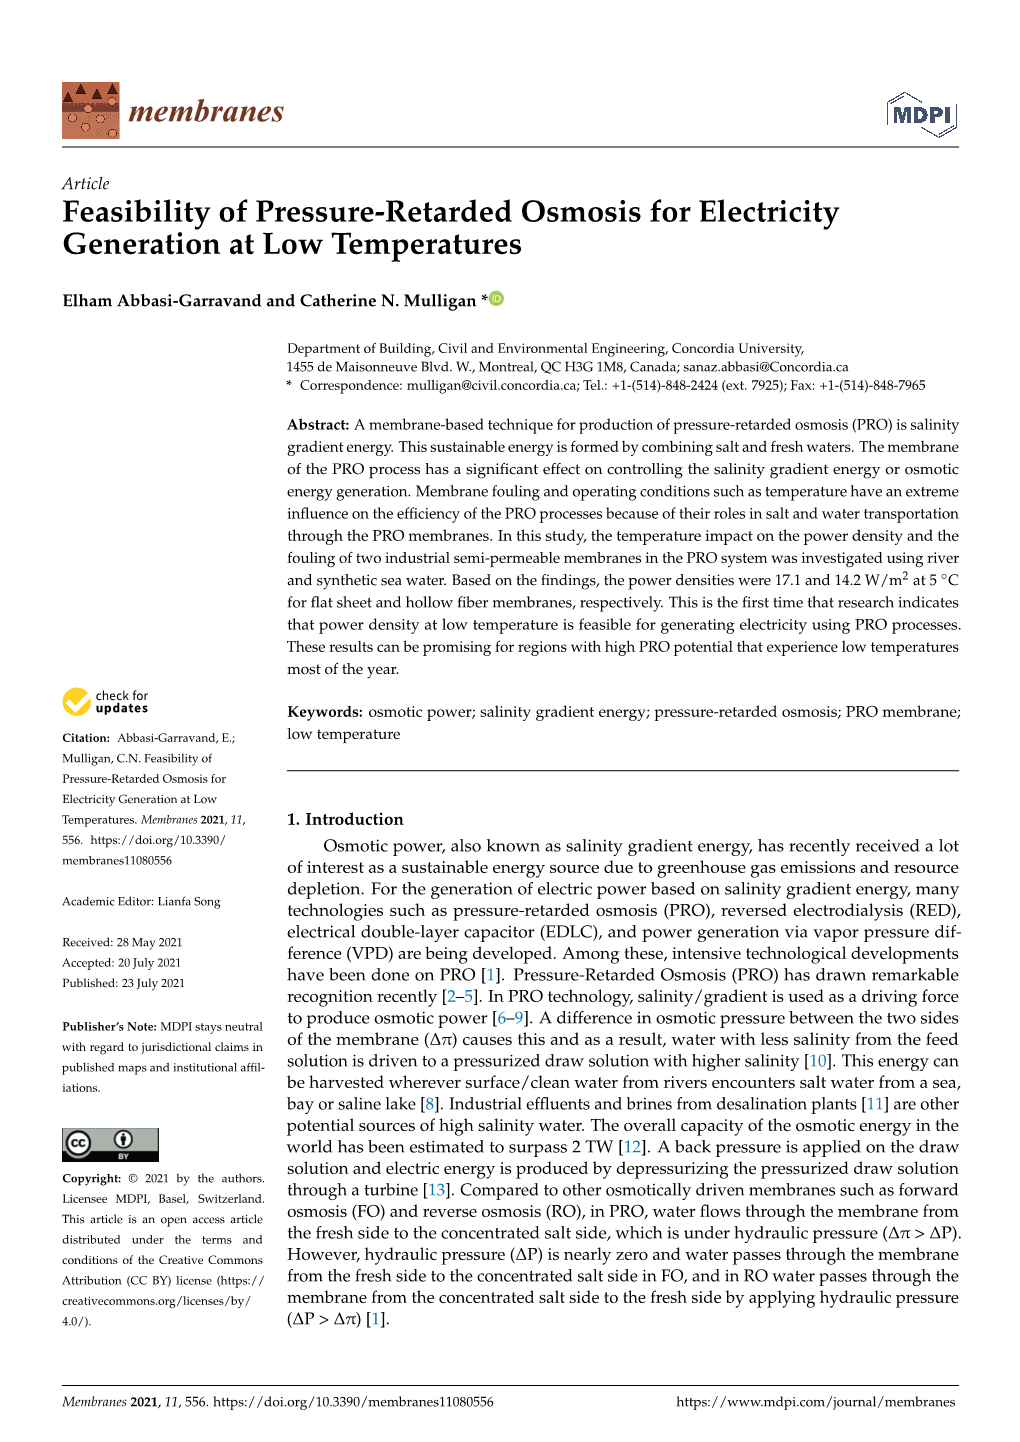 Feasibility of Pressure-Retarded Osmosis for Electricity Generation at Low Temperatures